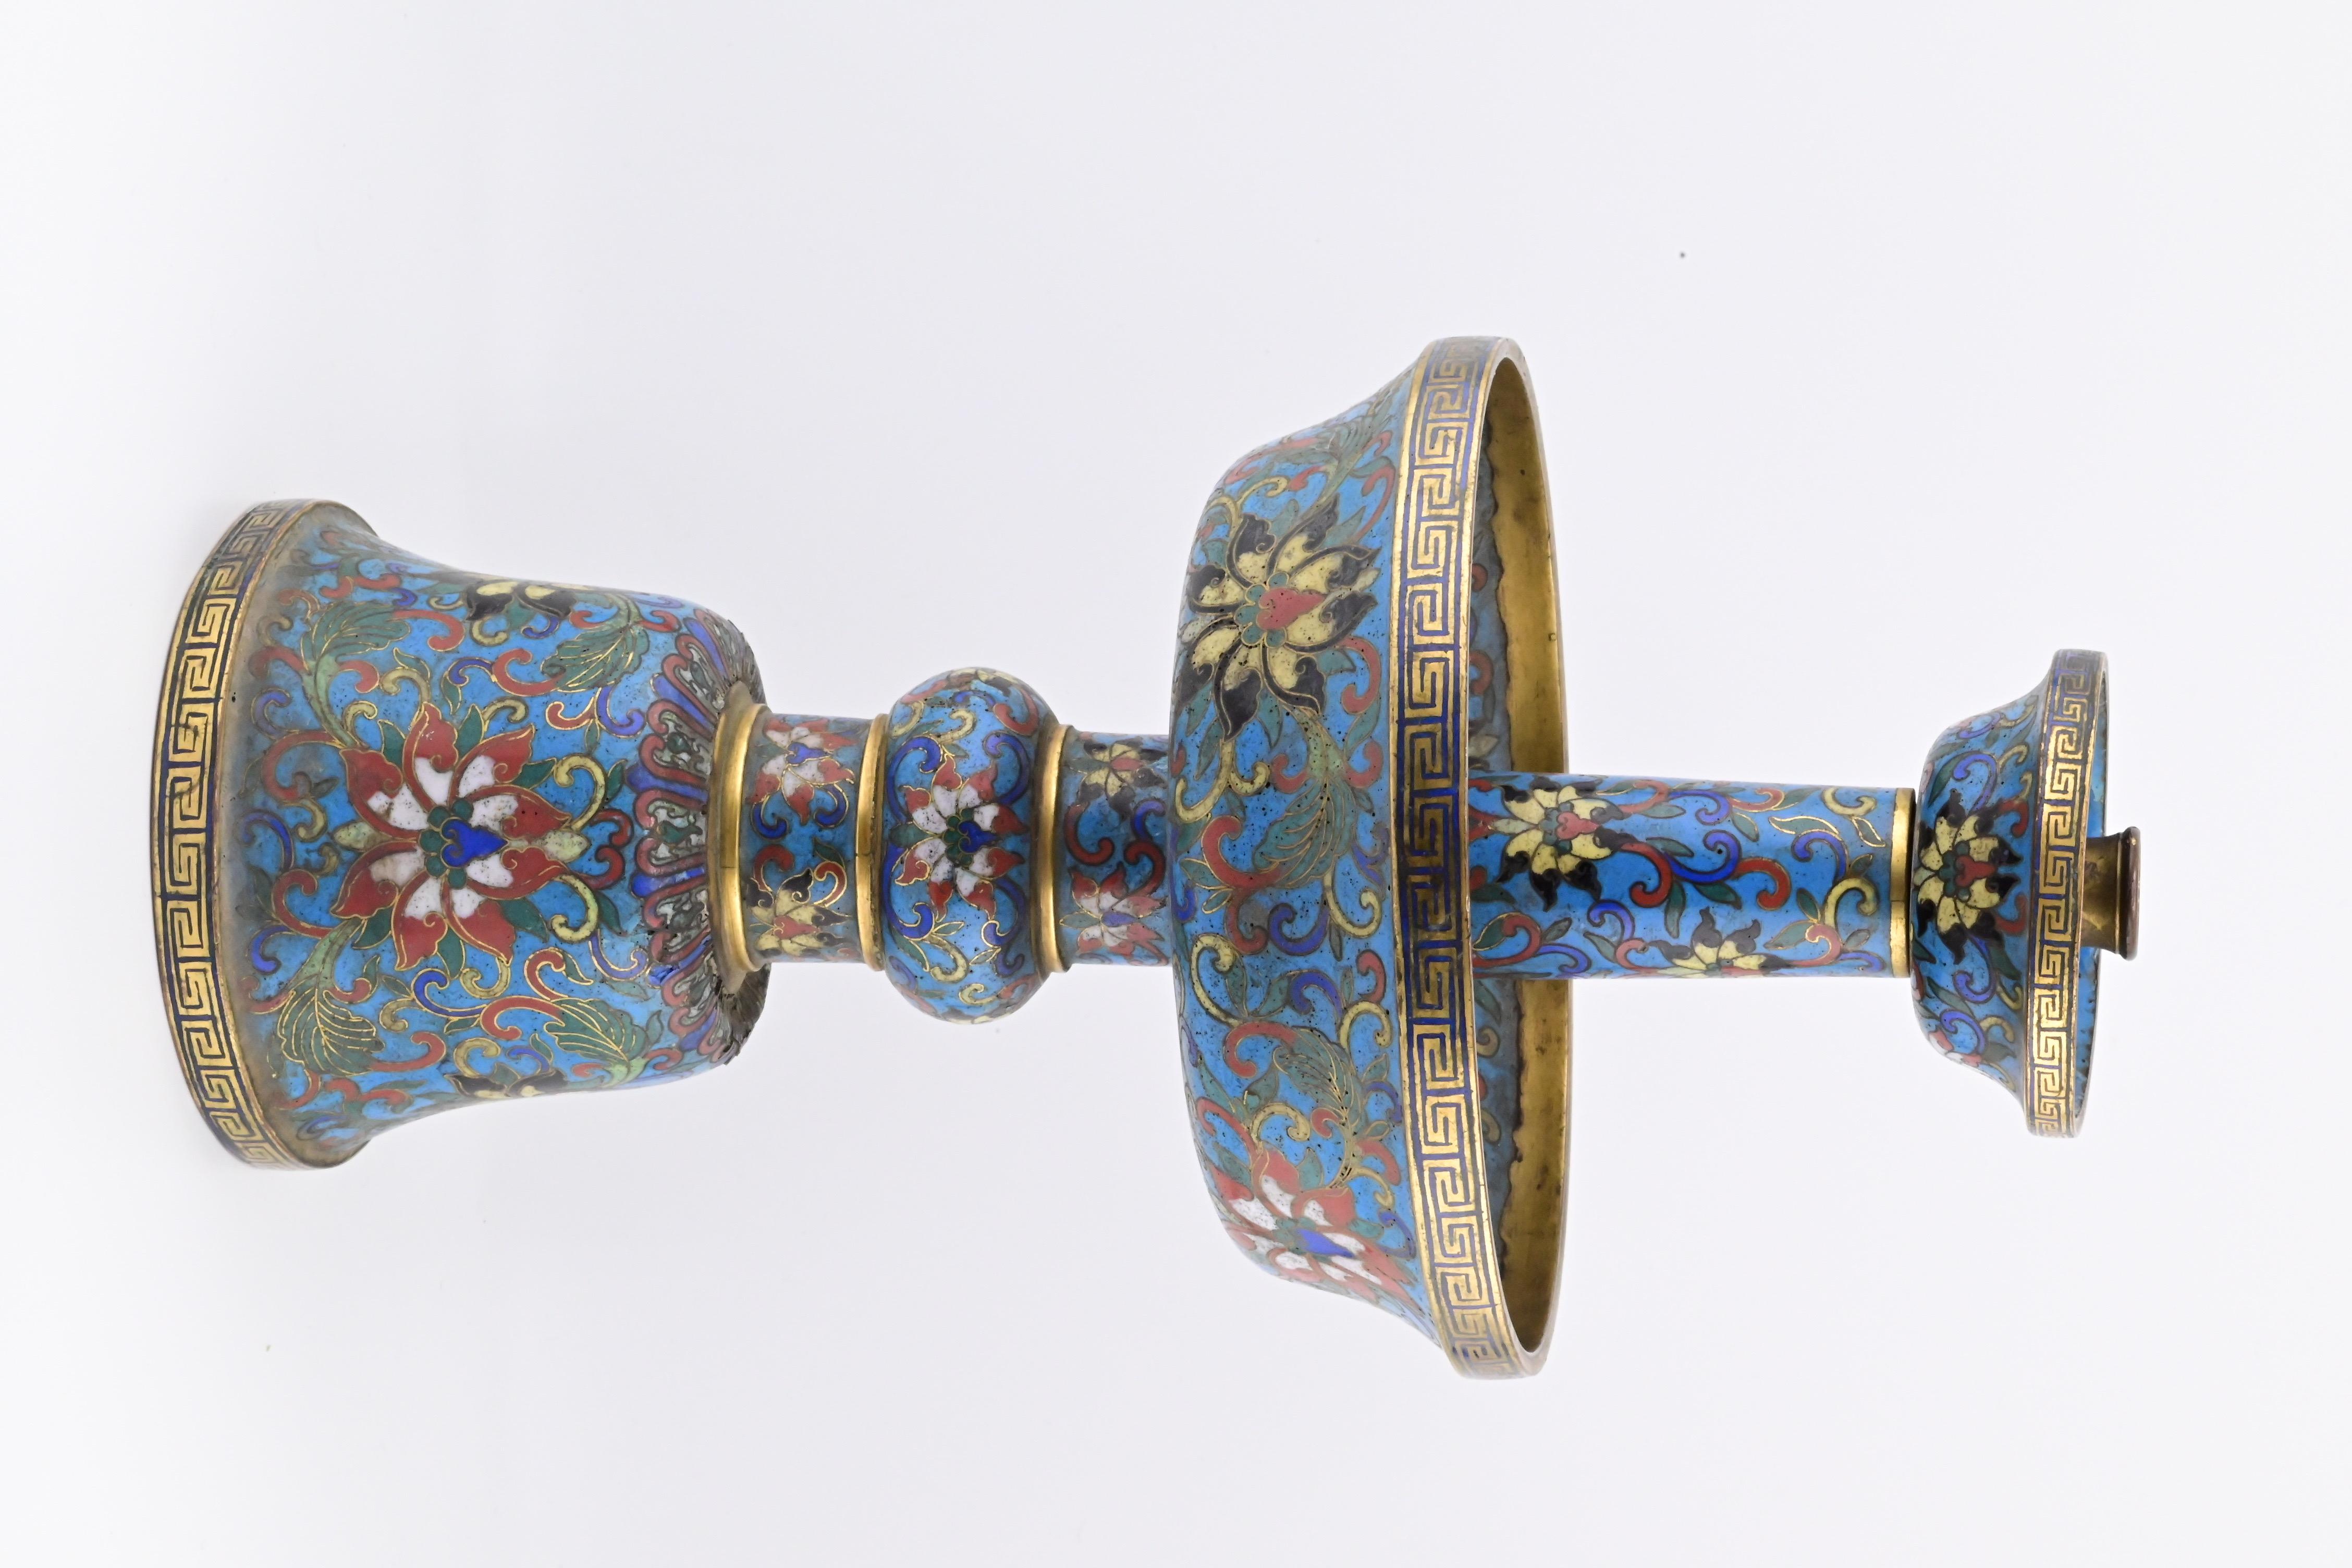 18th Century Chinese Cloisonné Bronze Candle Holder Qianlong Period For Sale 5